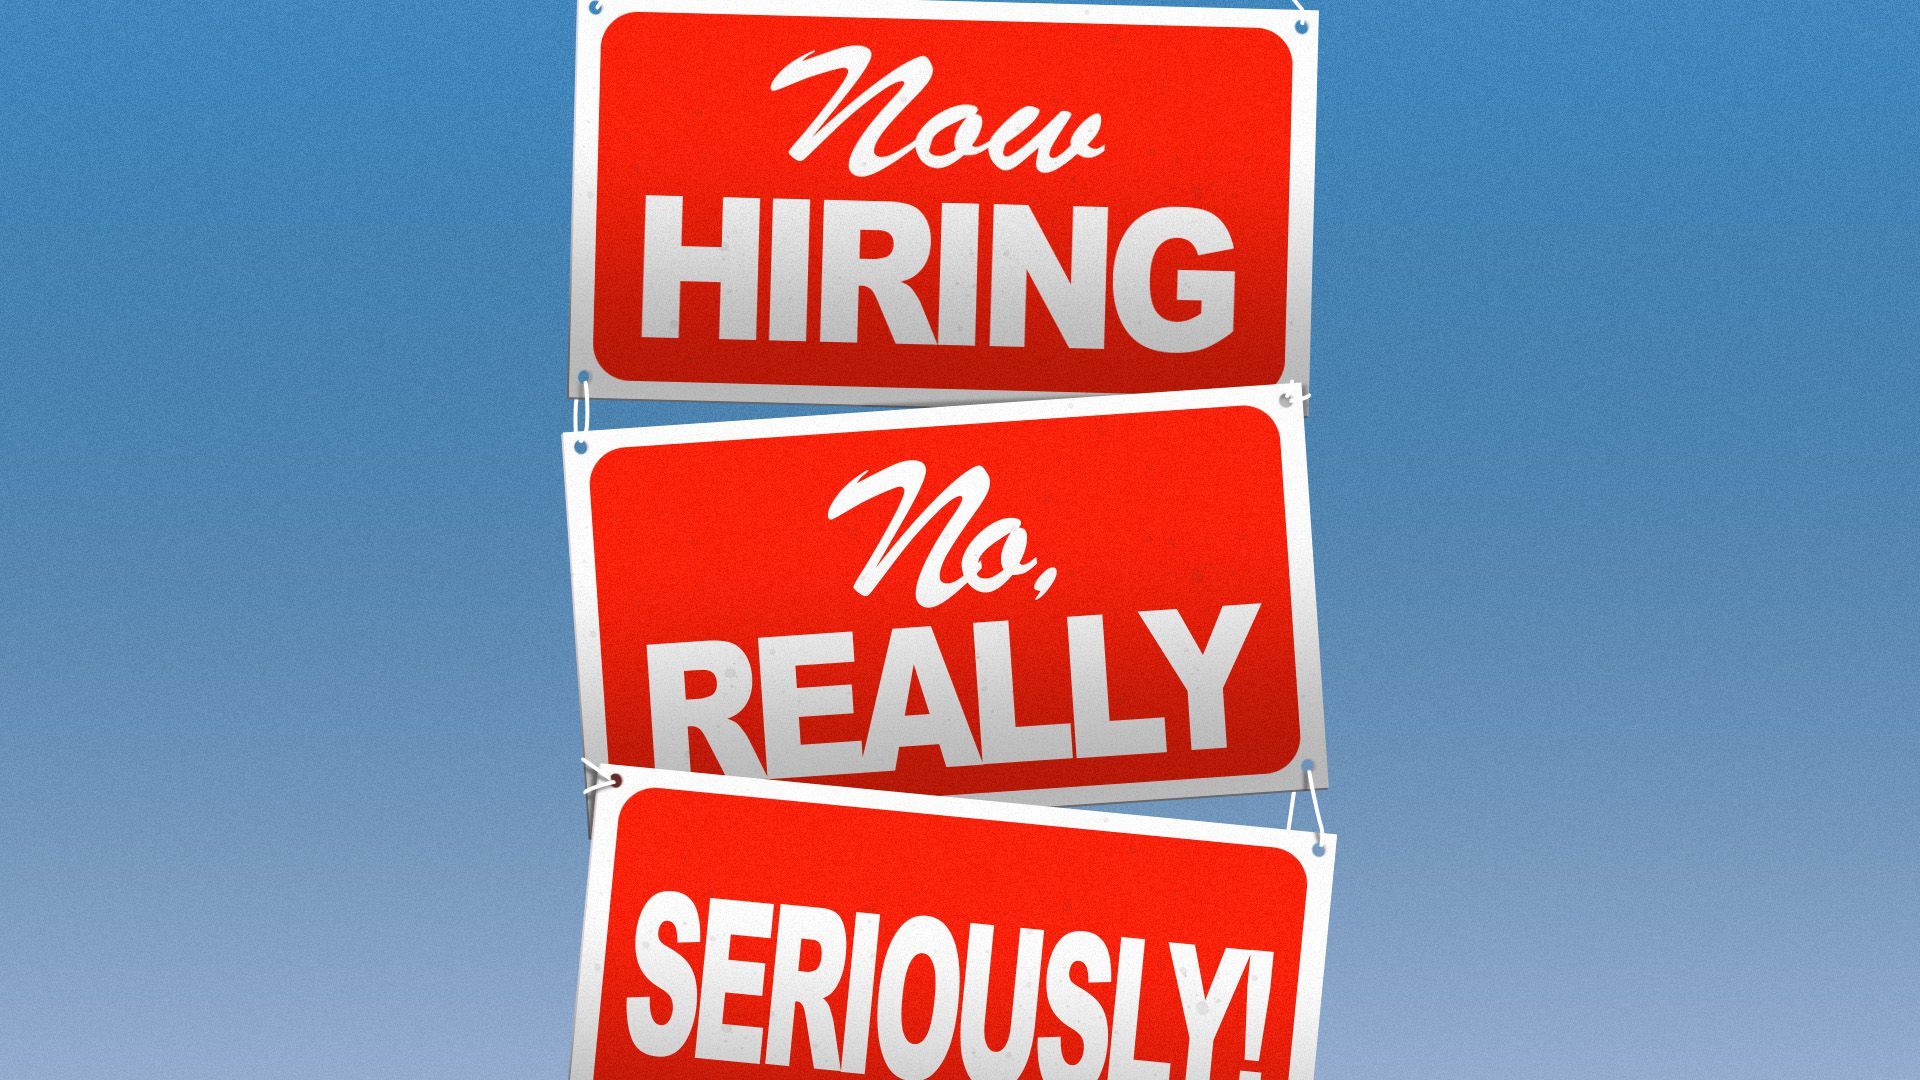 Illustration of increasingly desperate "now hiring" signs